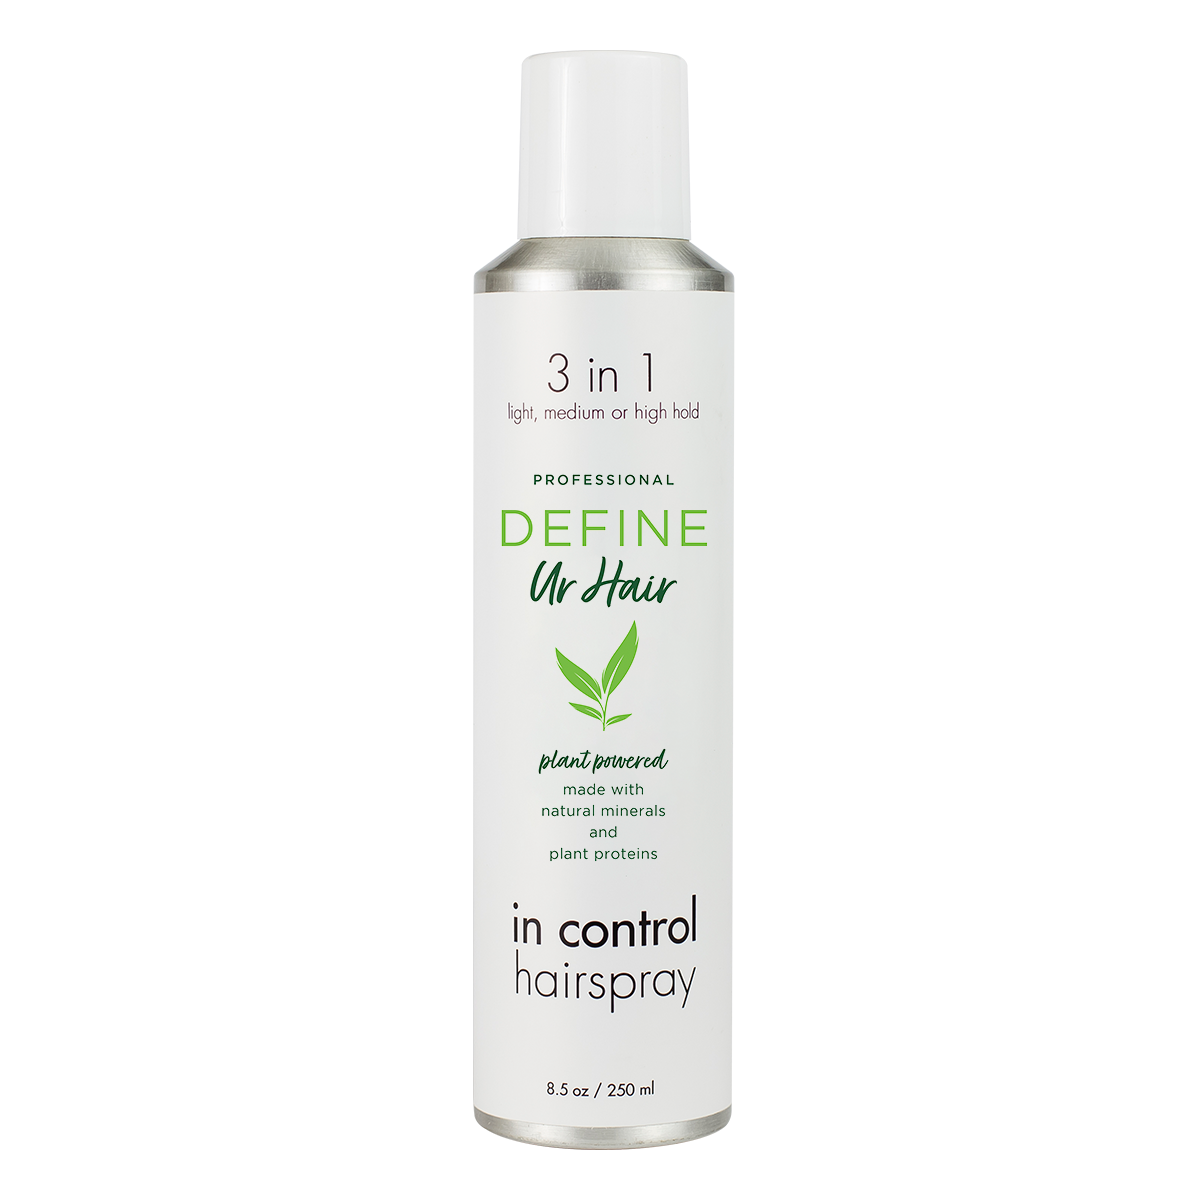 Product image of 3-in1 control hairspray by Define Ur Hair